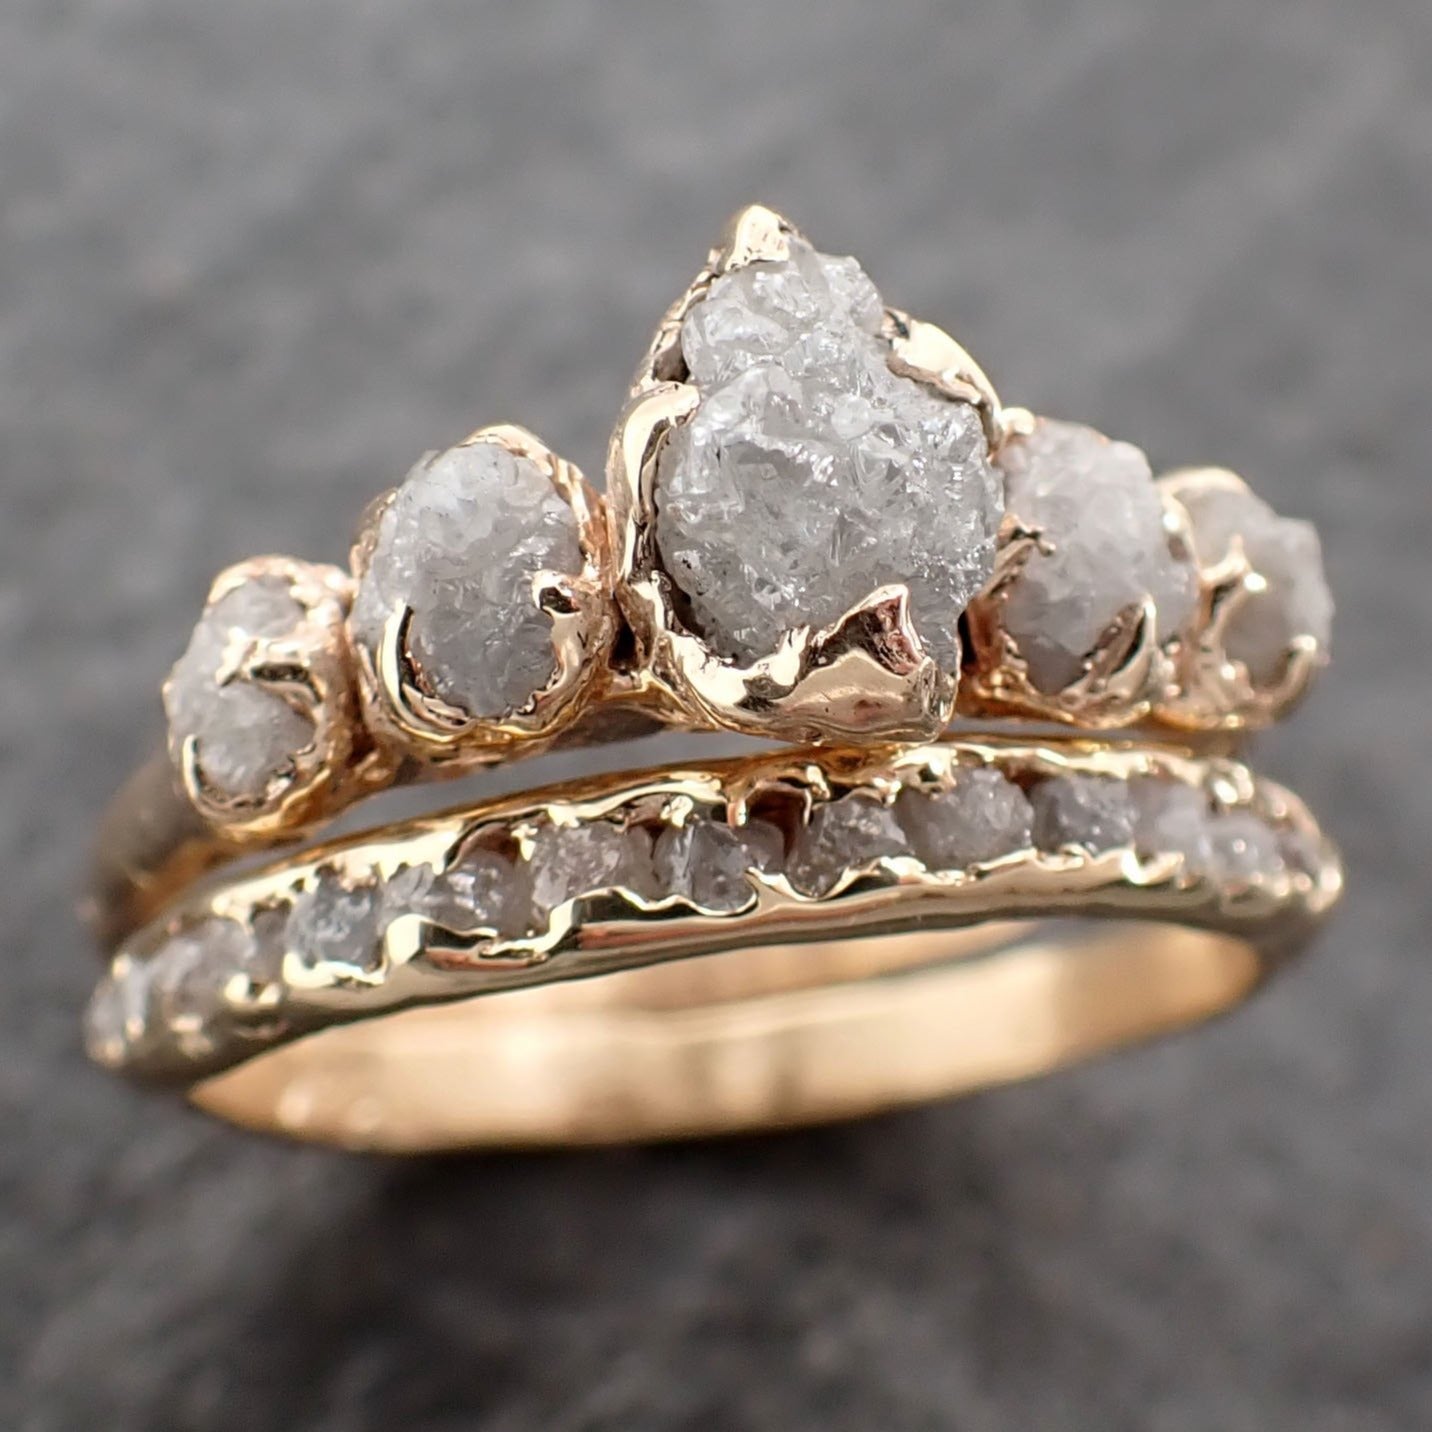 5 stone Raw Diamond gold multi stone Engagement Ring Rough Gold Wedding Dainty Delicate Ring custom made diamond Wedding Ring Rough C2550